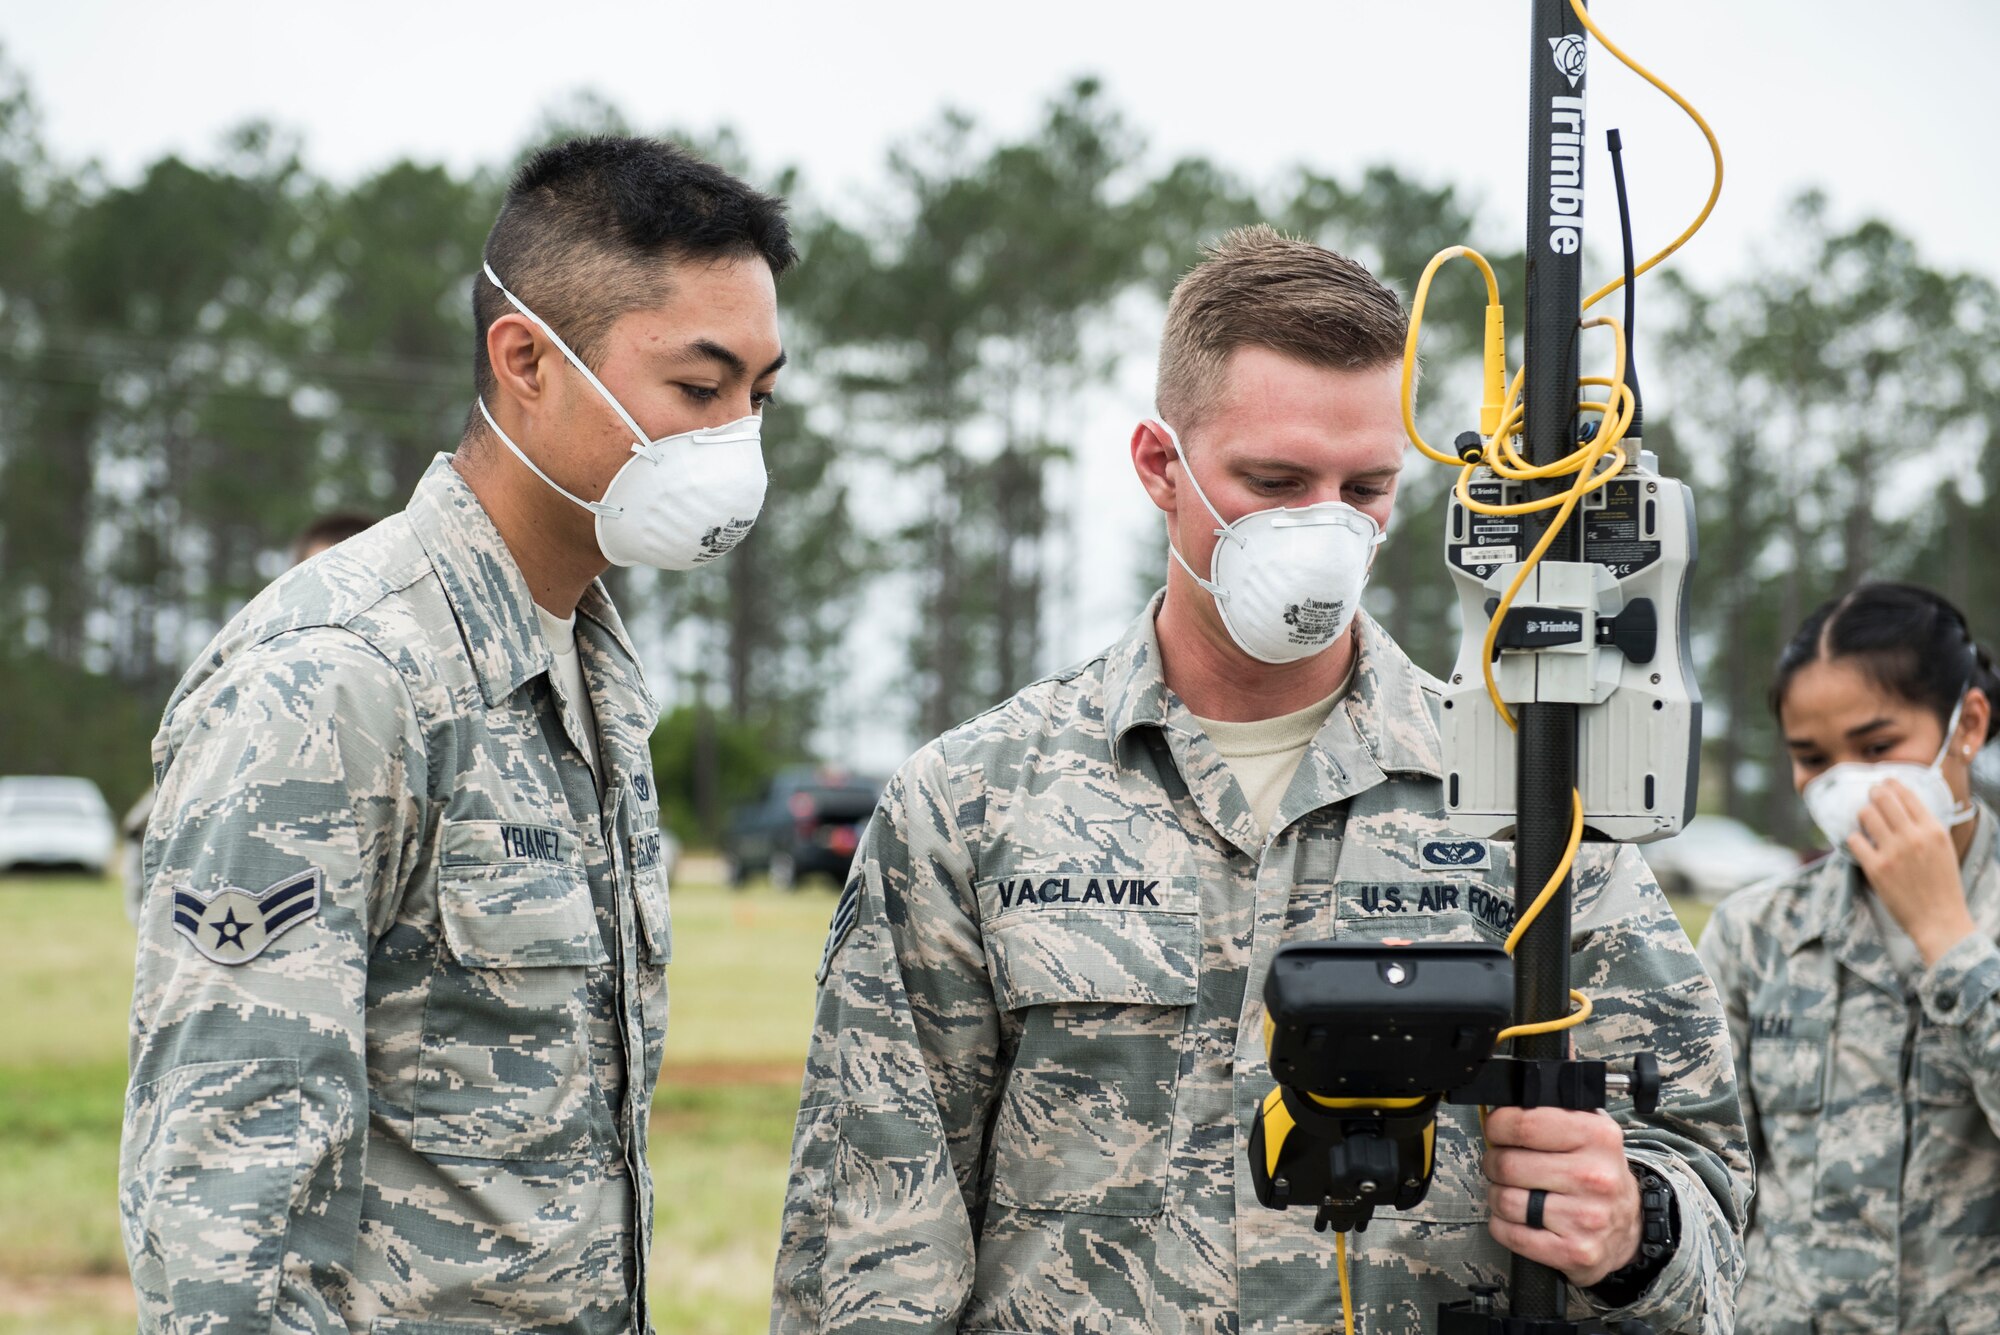 U.S. Airmen assigned to the 20th Civil Engineer Squadron mark the coordinates of a found object during a search and recovery exercise at Shaw Air Force Base, S.C., May 23, 2018.